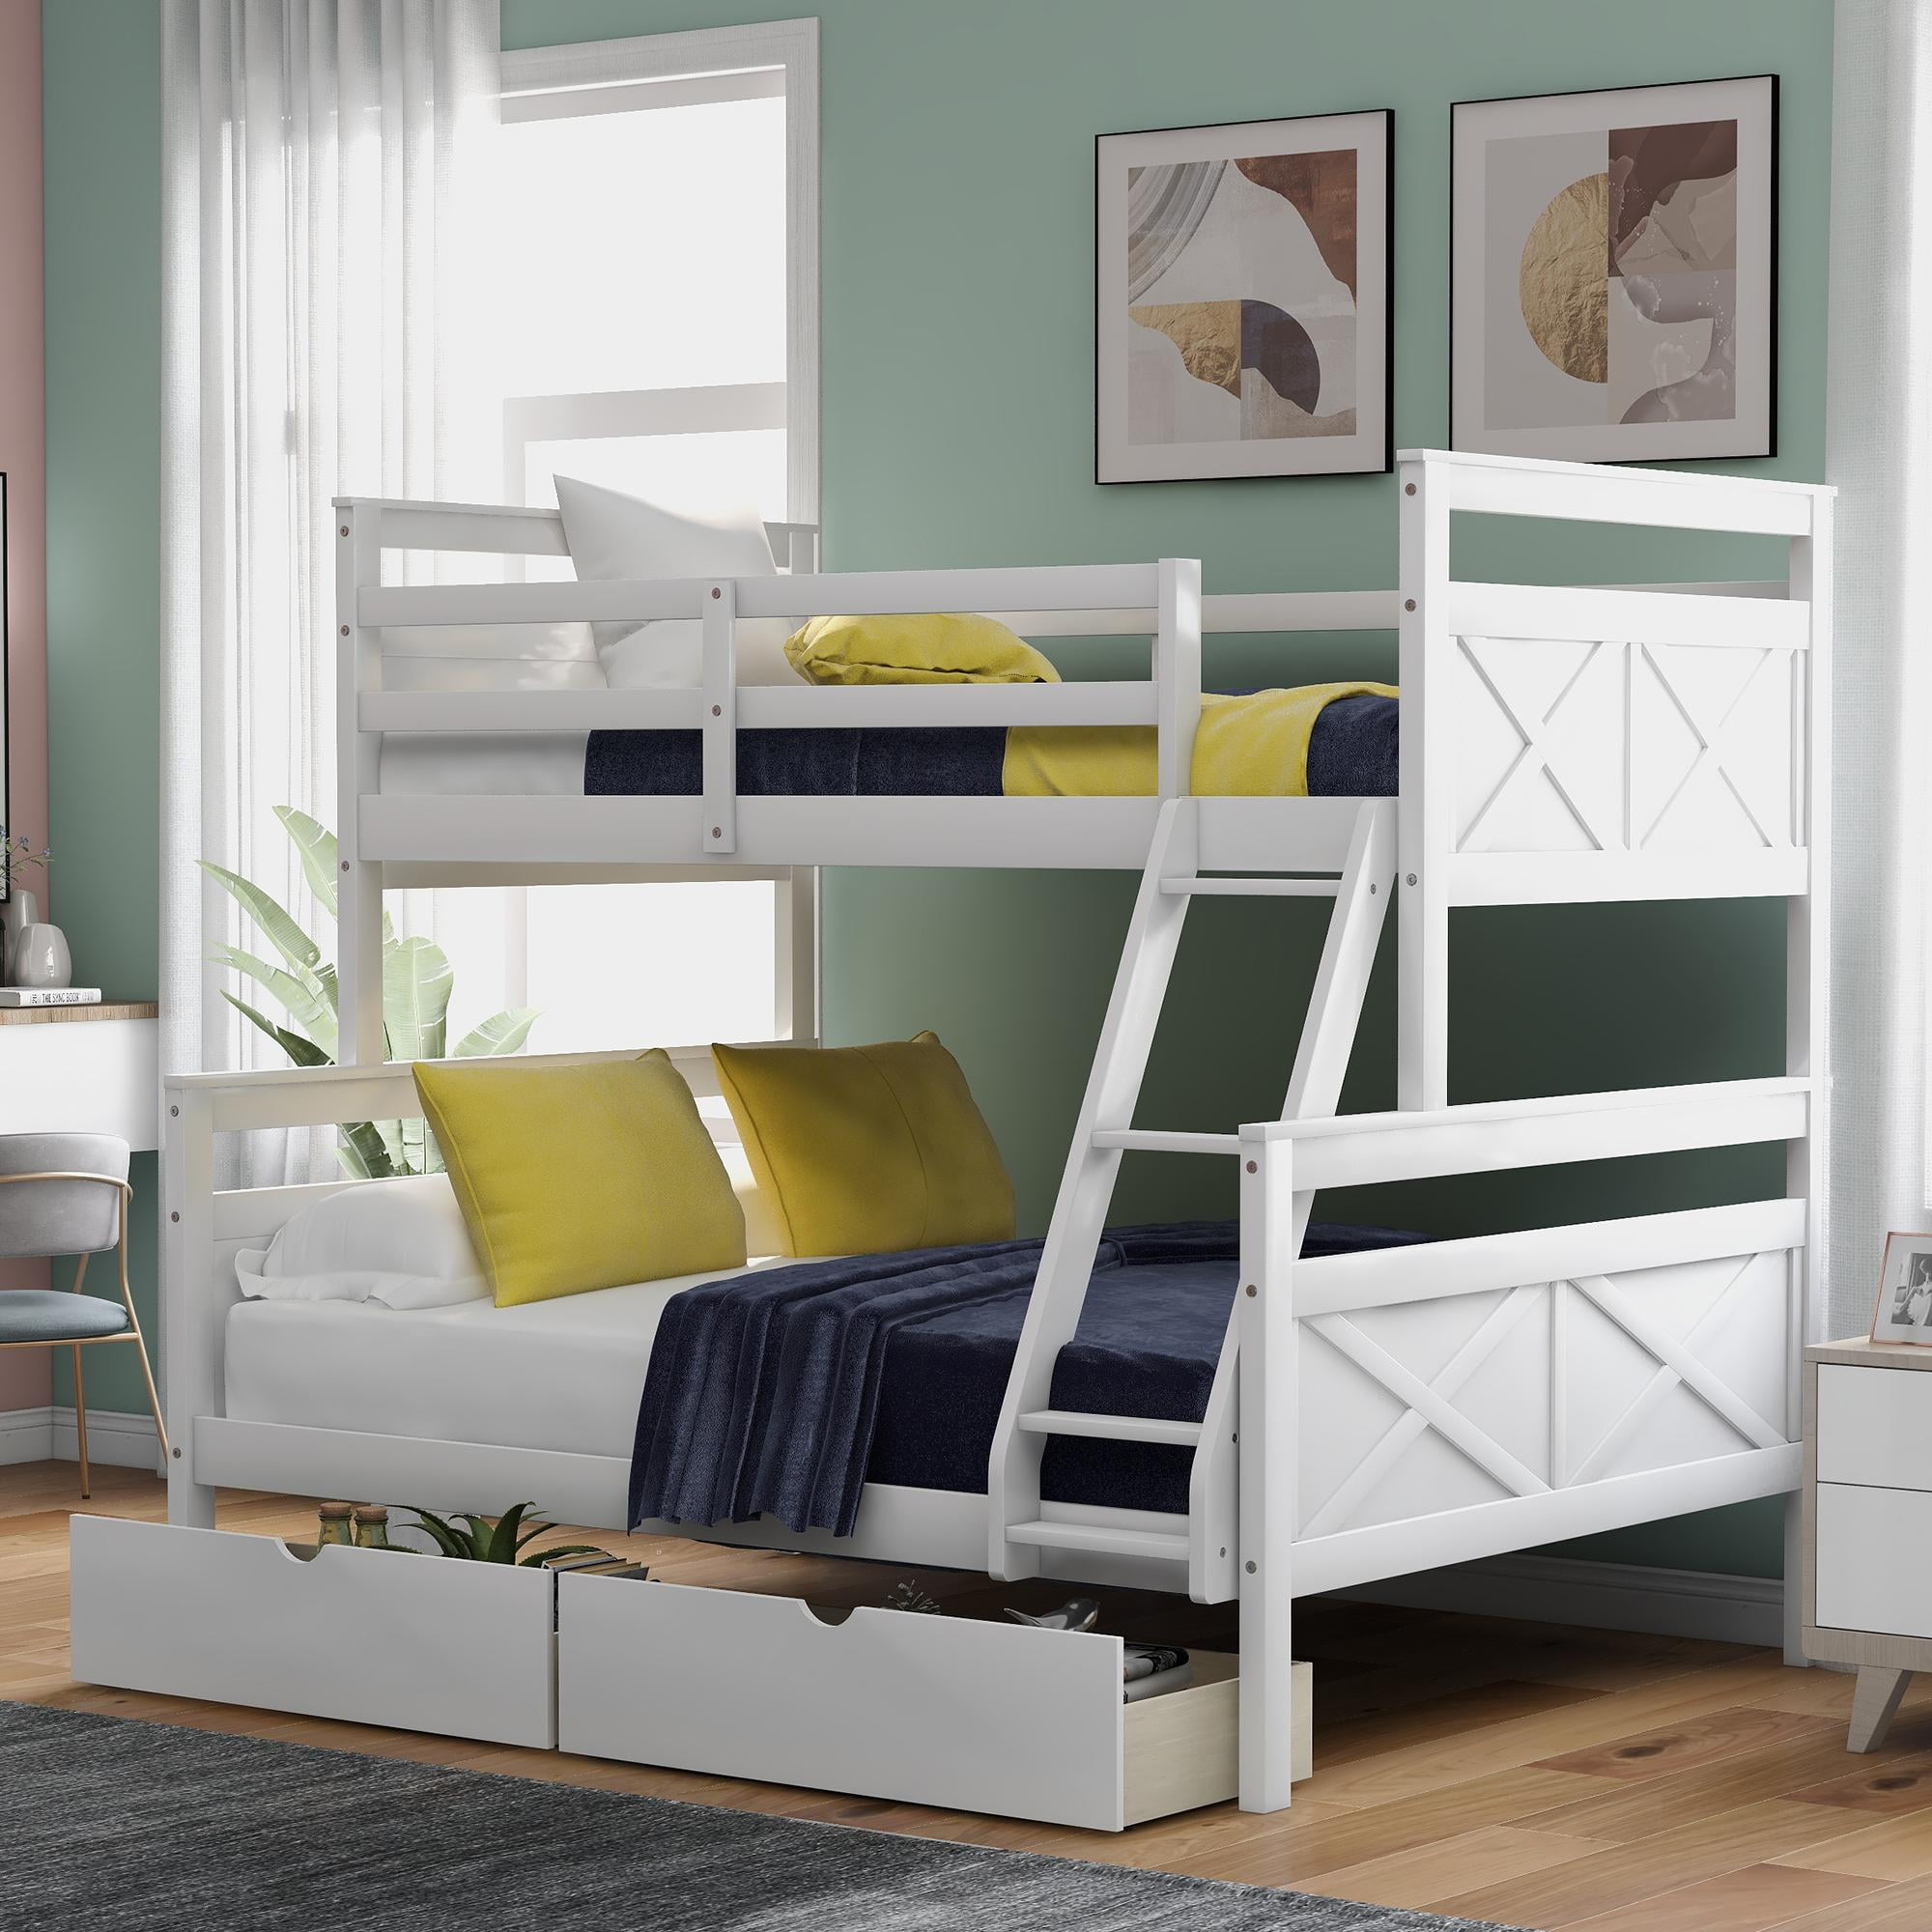 Hardwood Twin Bunk Beds Rubber Wood 2 Individual Kid Bed Ladder Guardrail White 